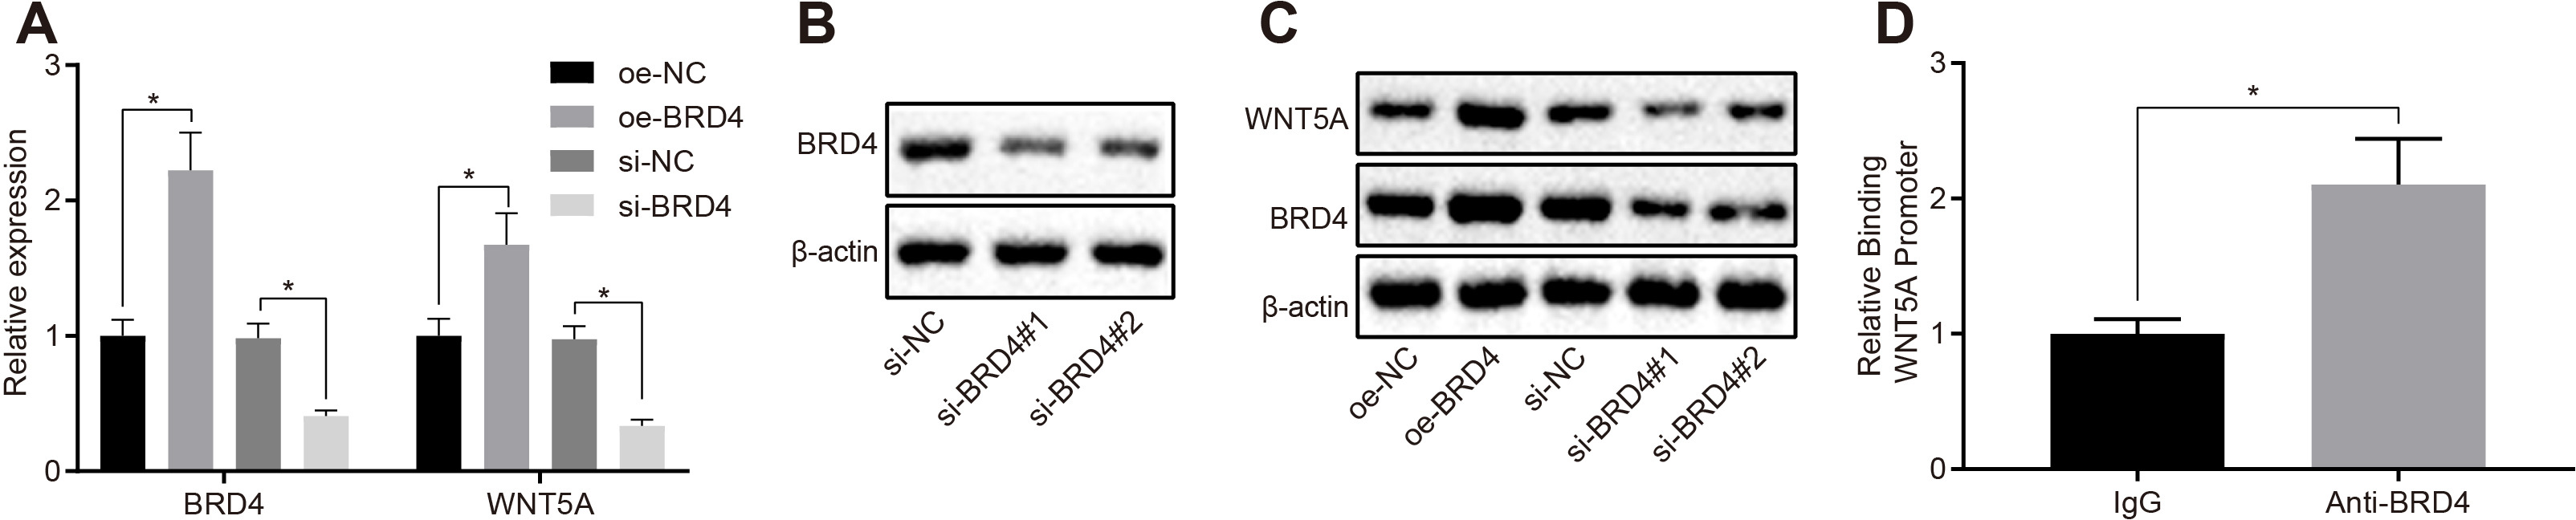 Fig. 3 
            Bromodomain-containing protein 4 (BRD4) promoted the expression of Wnt family member 5A (WNT5A) via binding to the promoter of WNT5A. a) Quantitative reverse transcription polymerase chain reaction (RT-qPCR) was used to detect the messenger RNA (mRNA) expression of BRD4 and WNT5A in dorsal root ganglia (DRG) cells transfected with oe-NC, oe-BRD4, silencing (si)-NC, or si-BRD4. b) Western blot analysis was used to detect the knock-down efficiency of si-BRD4. c) Western blot analysis was used to detect the protein expression of BRD4 and WNT5A in DRG cells transfected with different groups of plasmids. d) Chromatin immunoprecipitation was used to verify the binding site of BRD4 and WNT5A. *p < 0.05 versus the control. Measurement data were expressed as means and SDs. The independent-samples t-test was used to compare the data between two groups. Data comparison among multiple groups was analyzed by one-way analysis of variance (ANOVA), followed by Tukey’s post hoc test. Results were representative of three individual experiments. IgG, immunoglobin G.
          